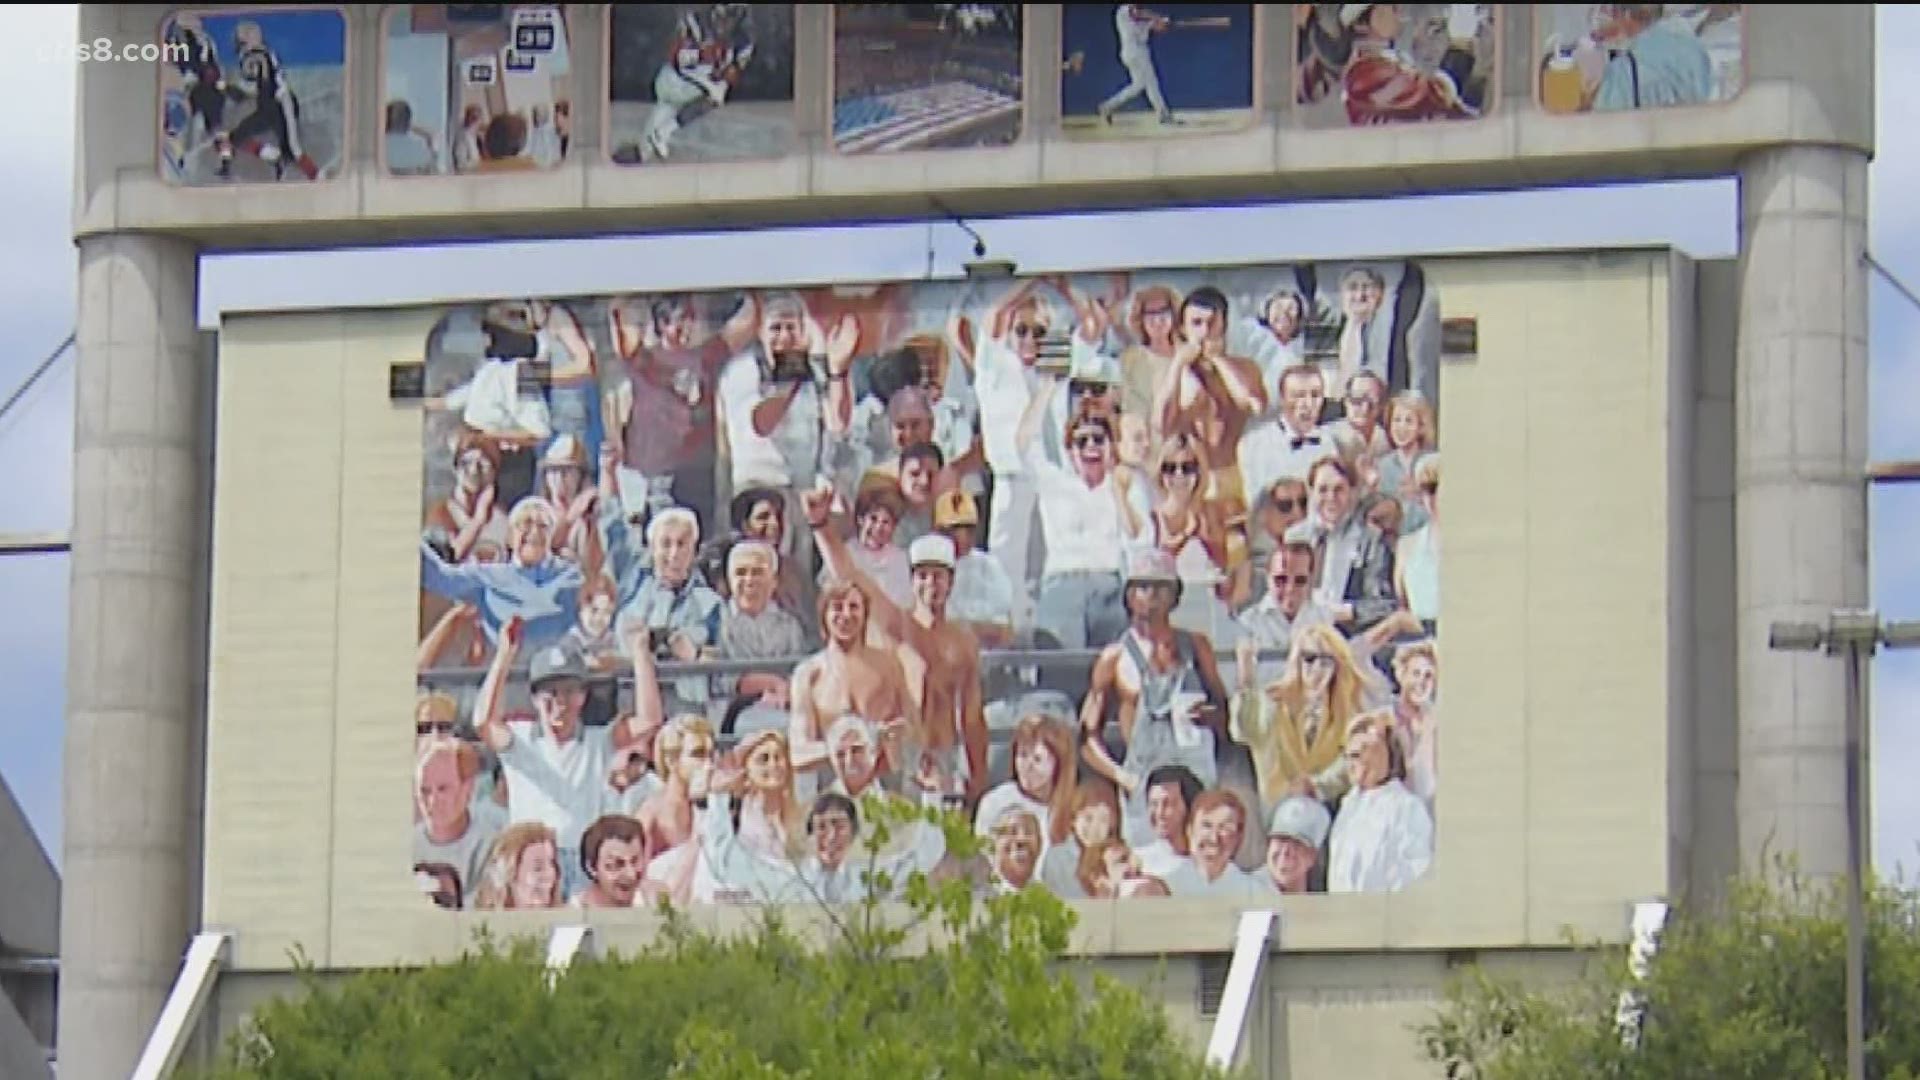 A group of San Diegans are pushing to preserve a historic mural at the stadium.